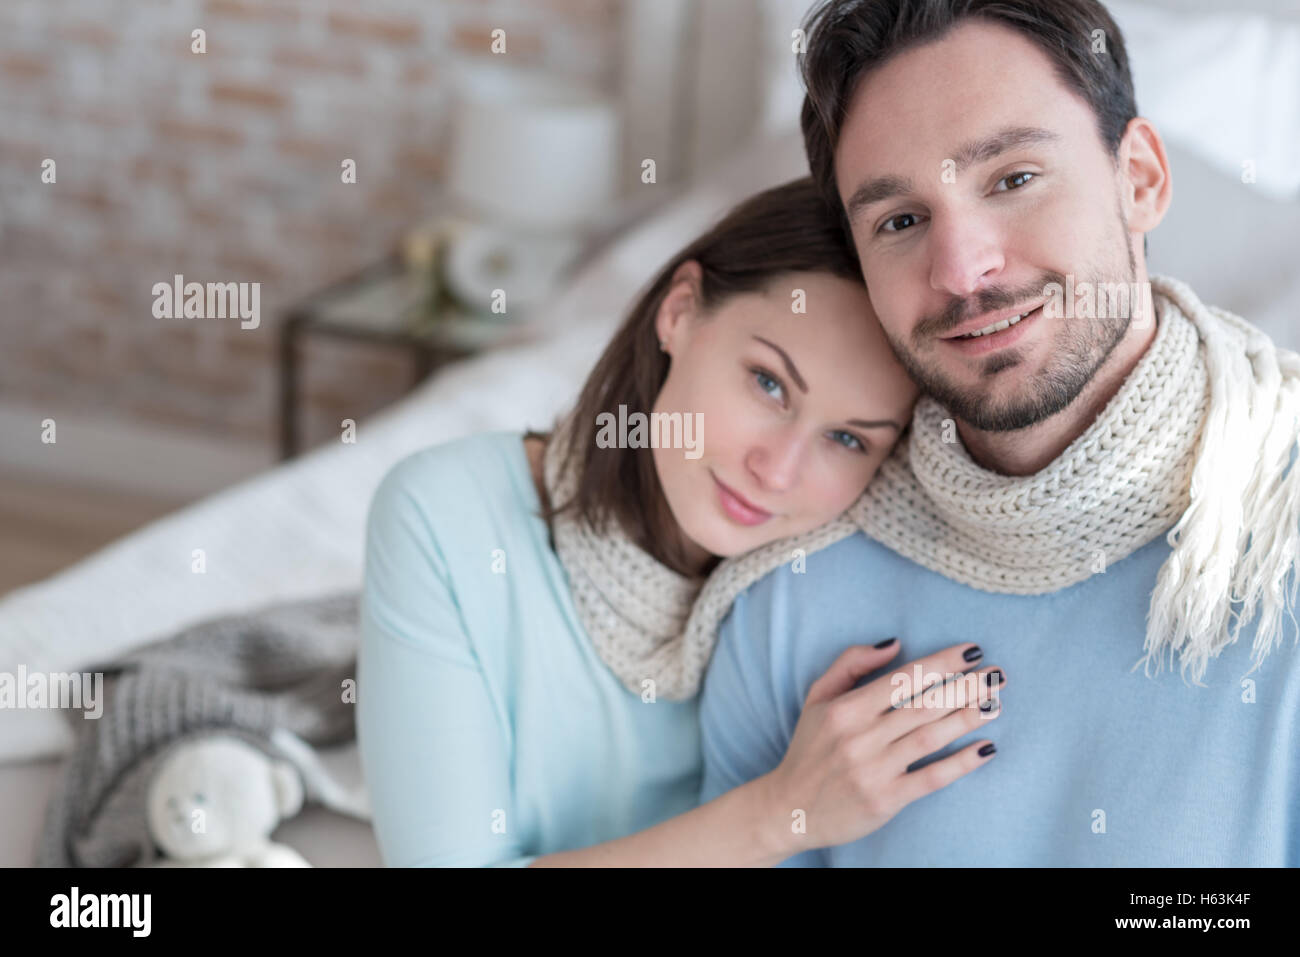 Happy delighted man sitting near his girlfriend Stock Photo